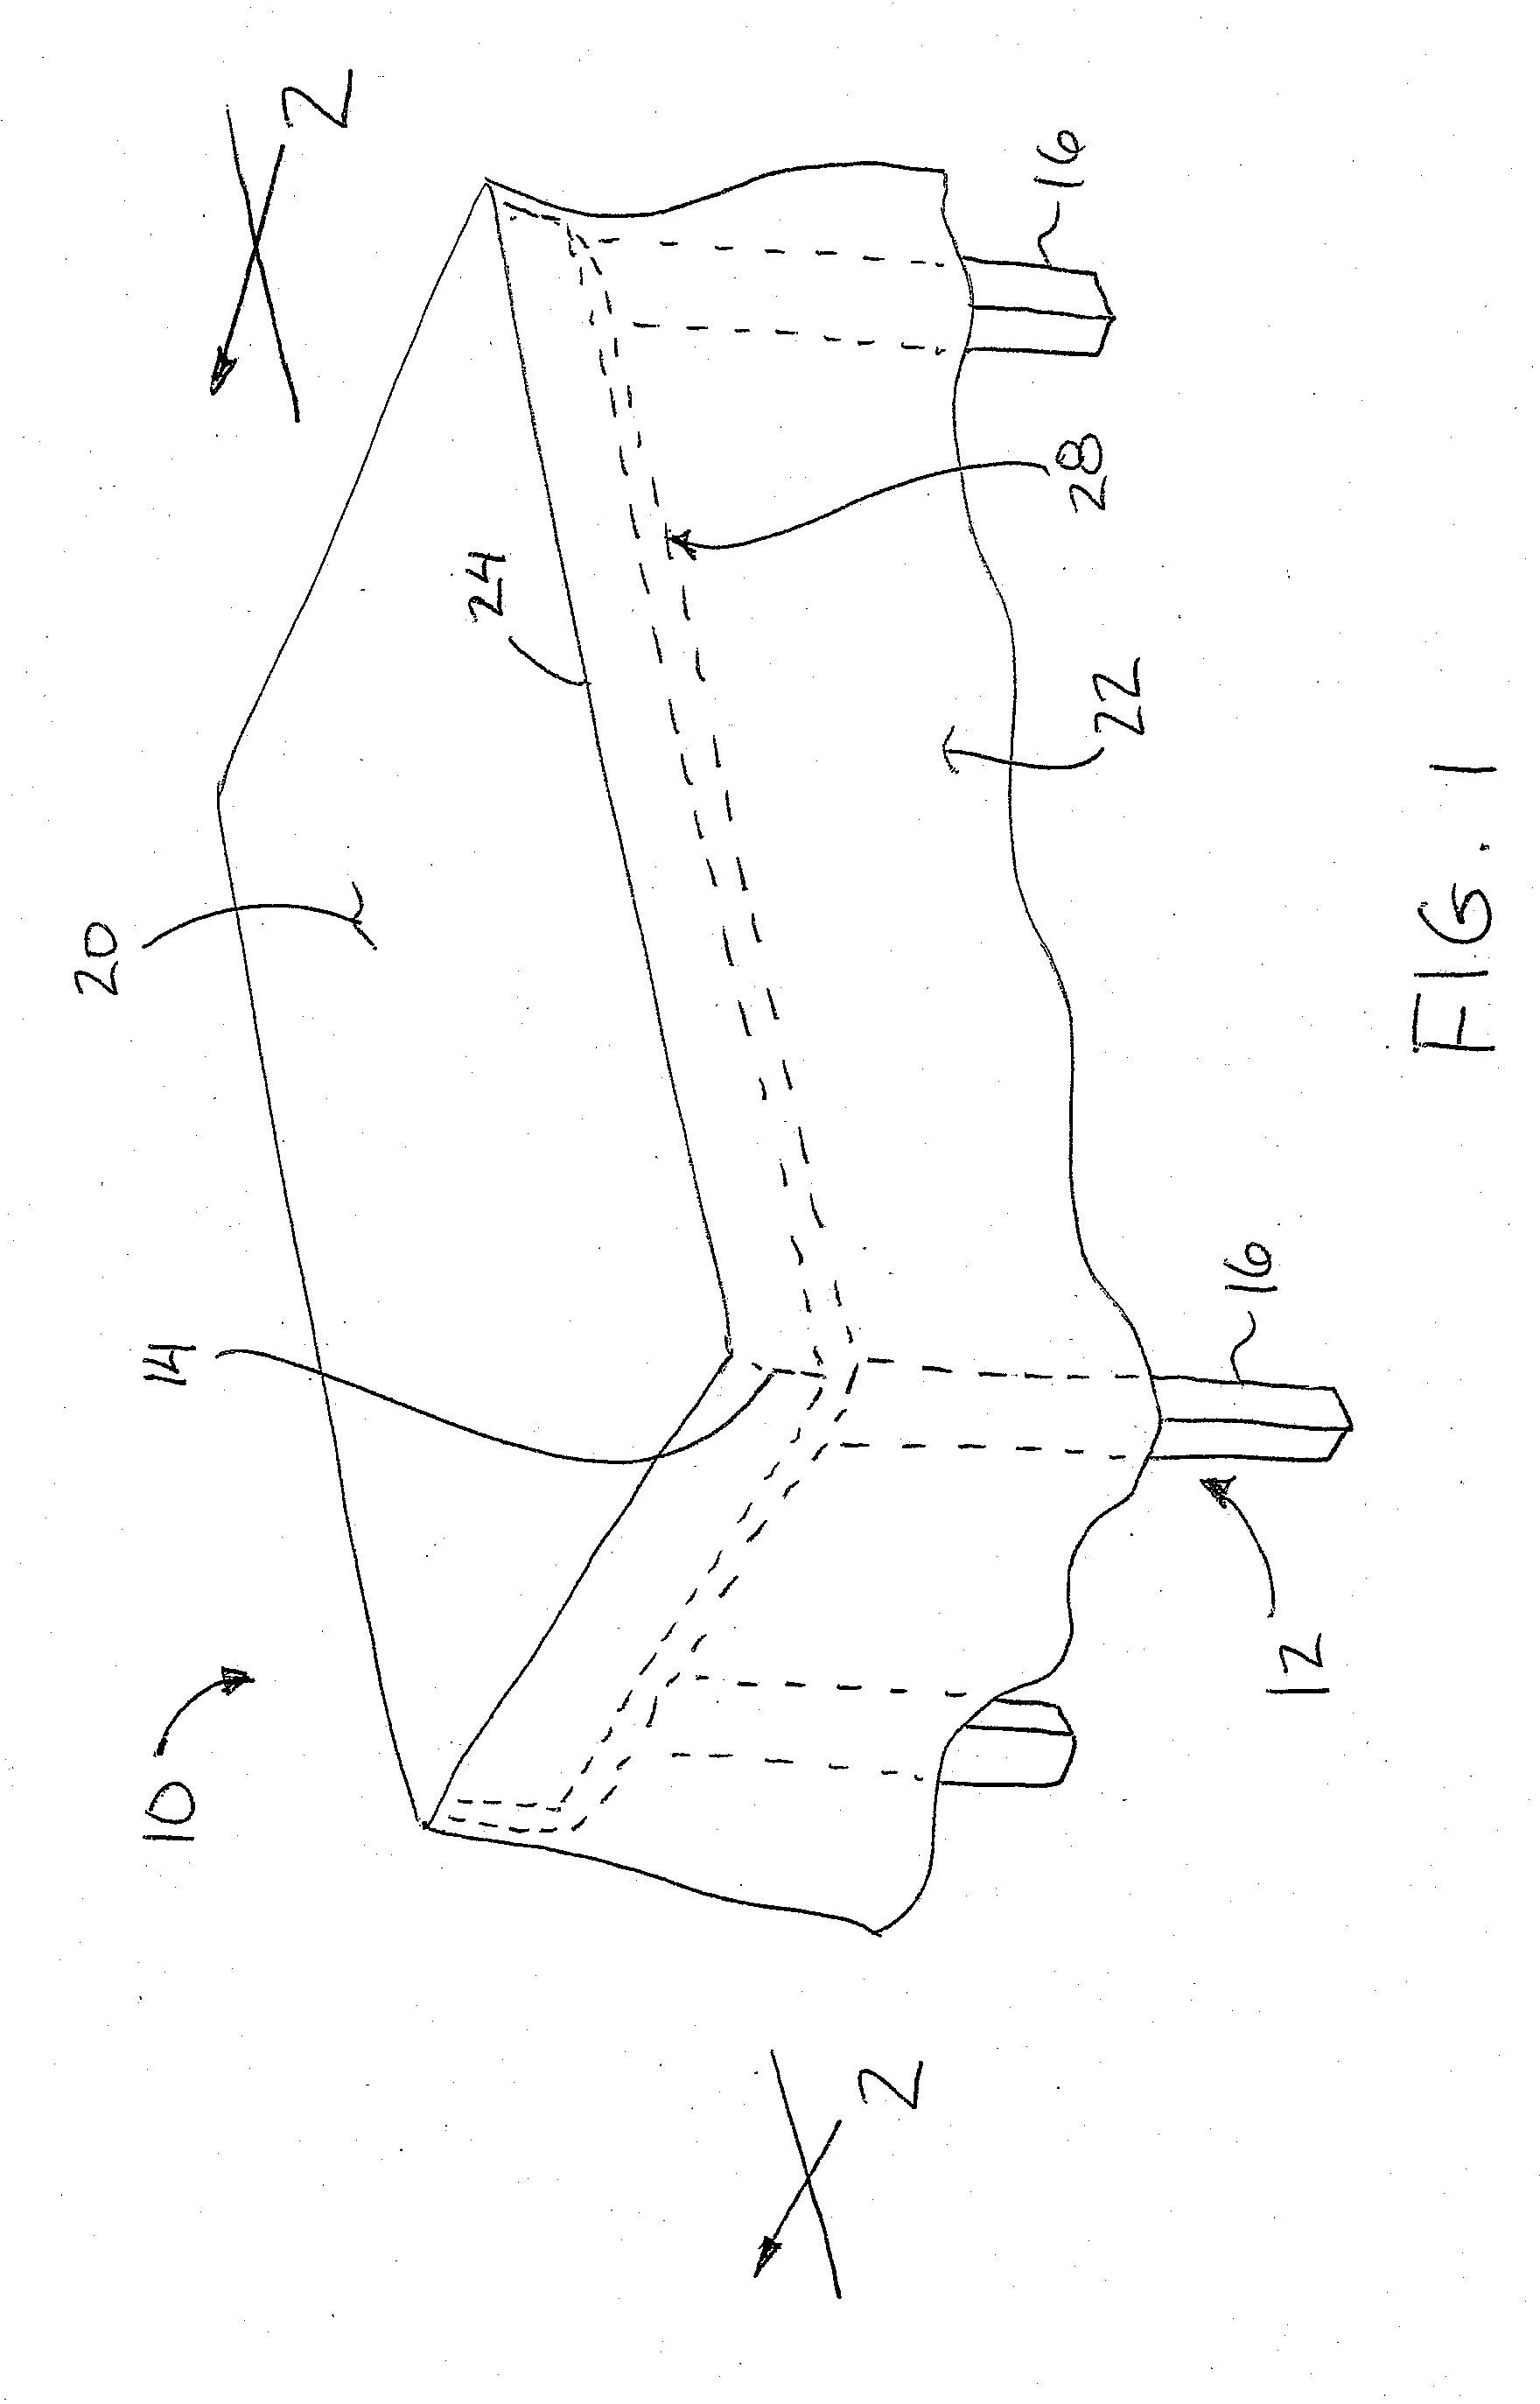 Table Covering Apparatus